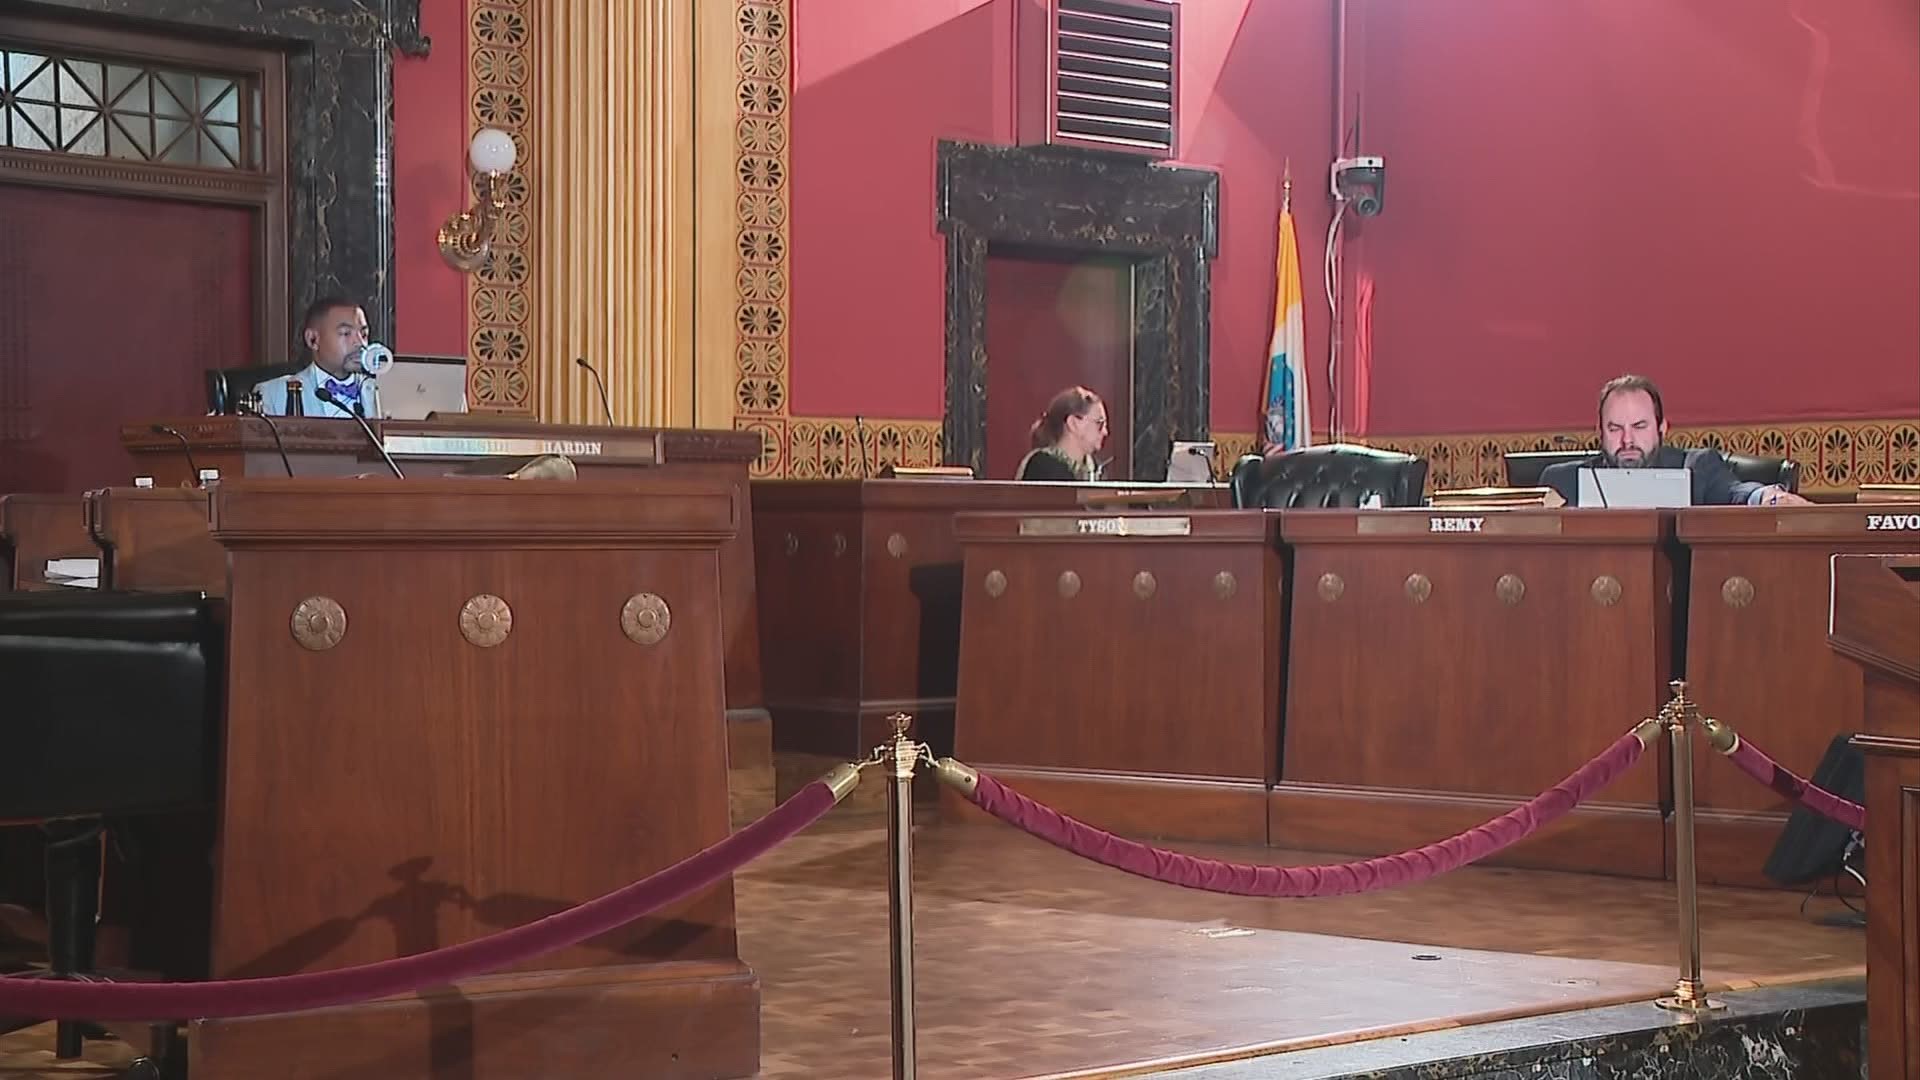 The Columbus City Council has voted to restrict bar hours and to approve an amendment to the city charter.